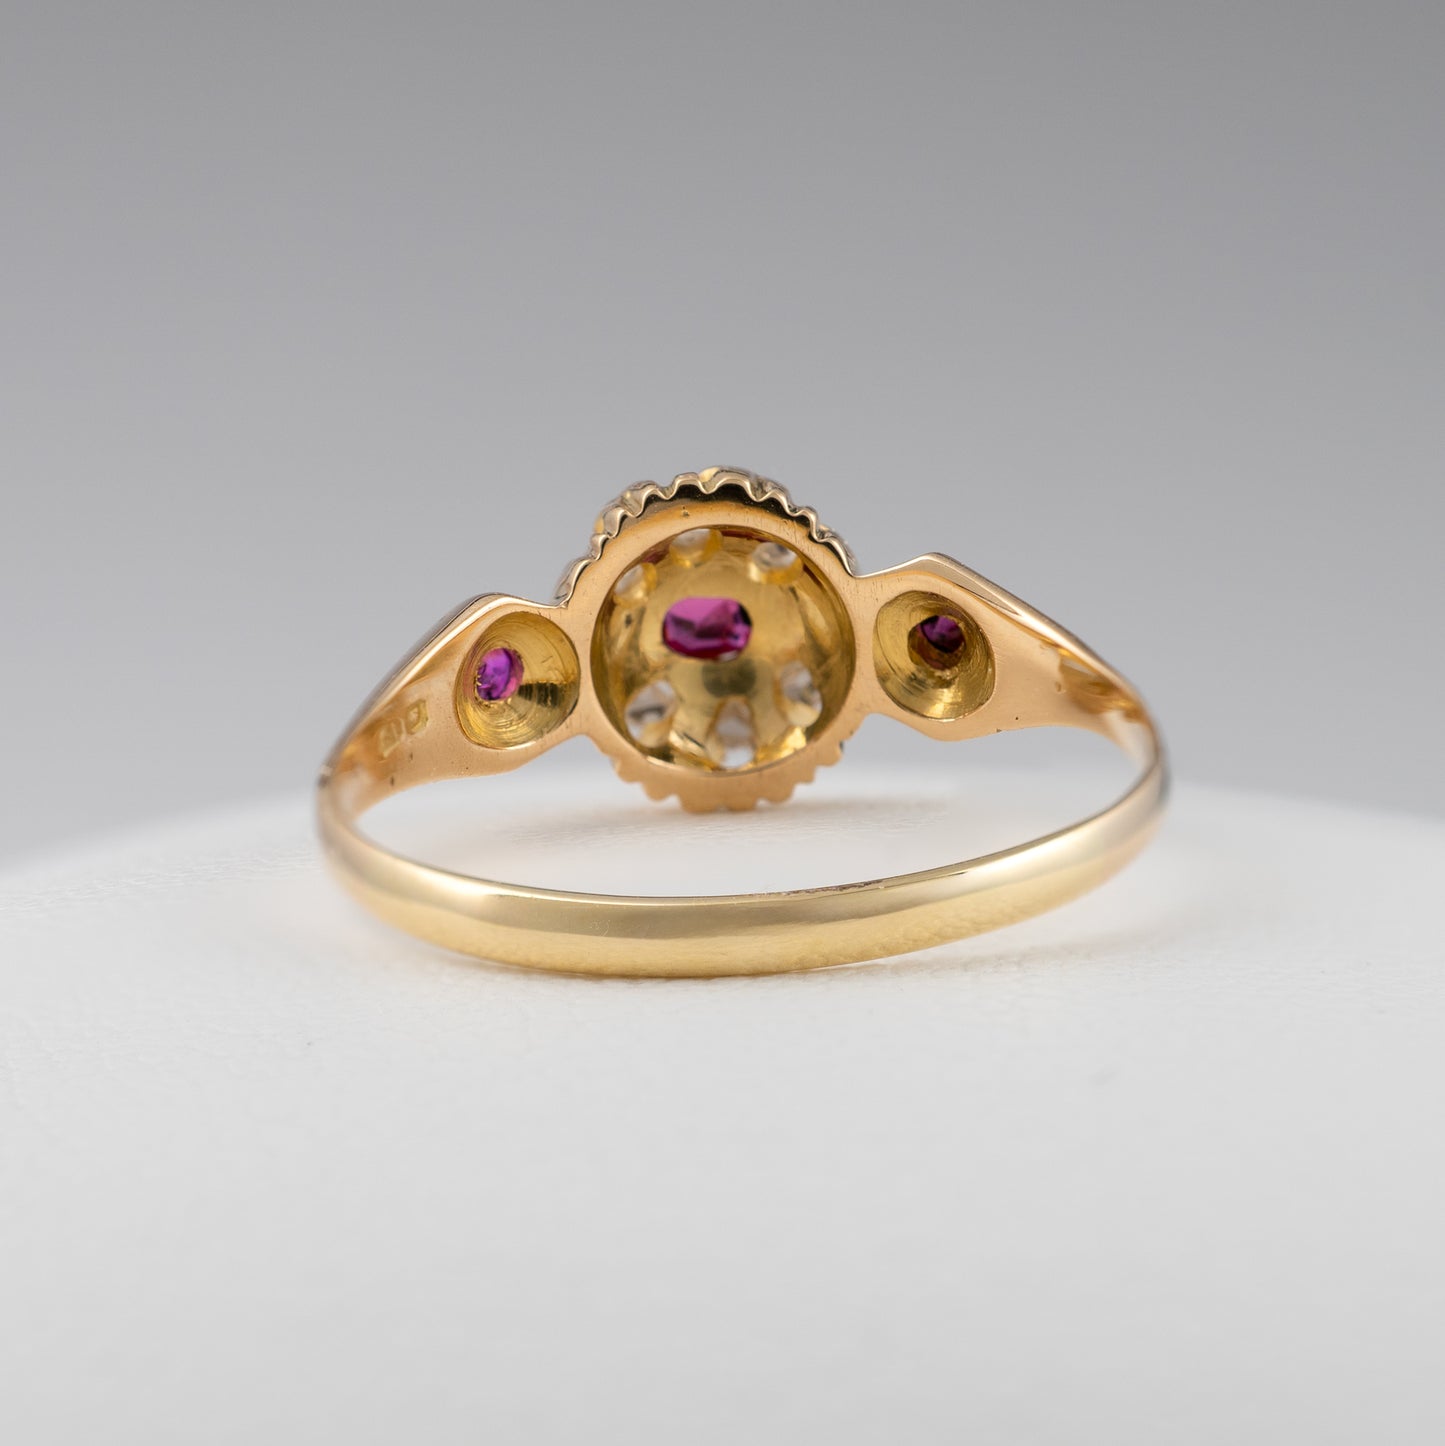 Antique 18ct Yellow Gold Ruby Diamond Ring Size M